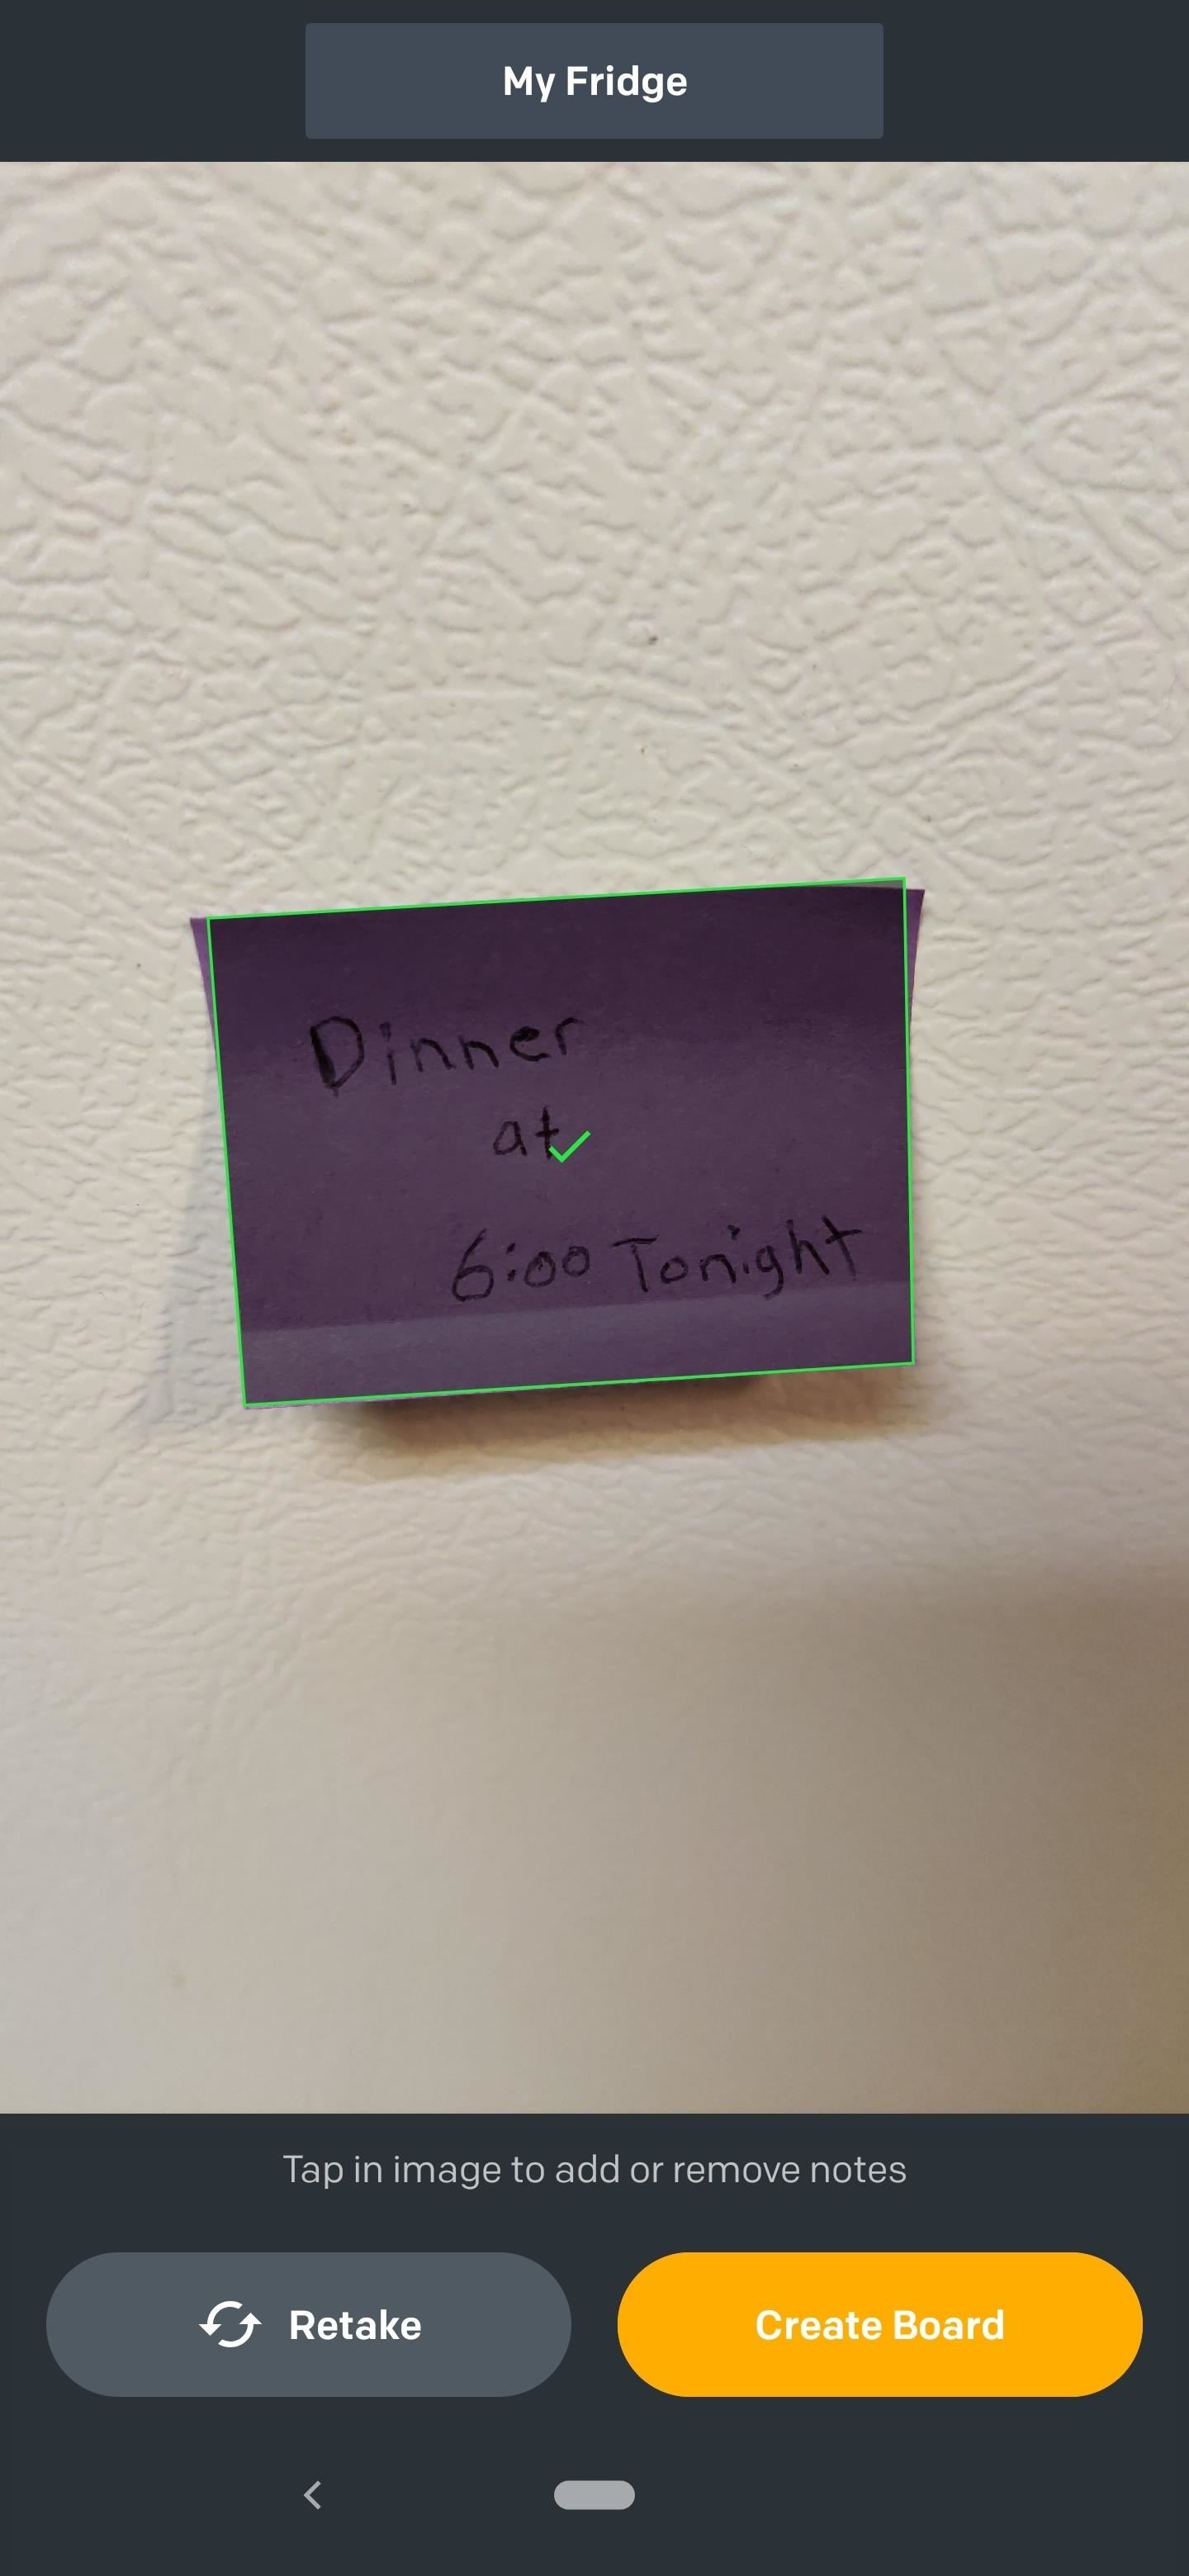 How to Digitize the Sticky Notes on Your Fridge